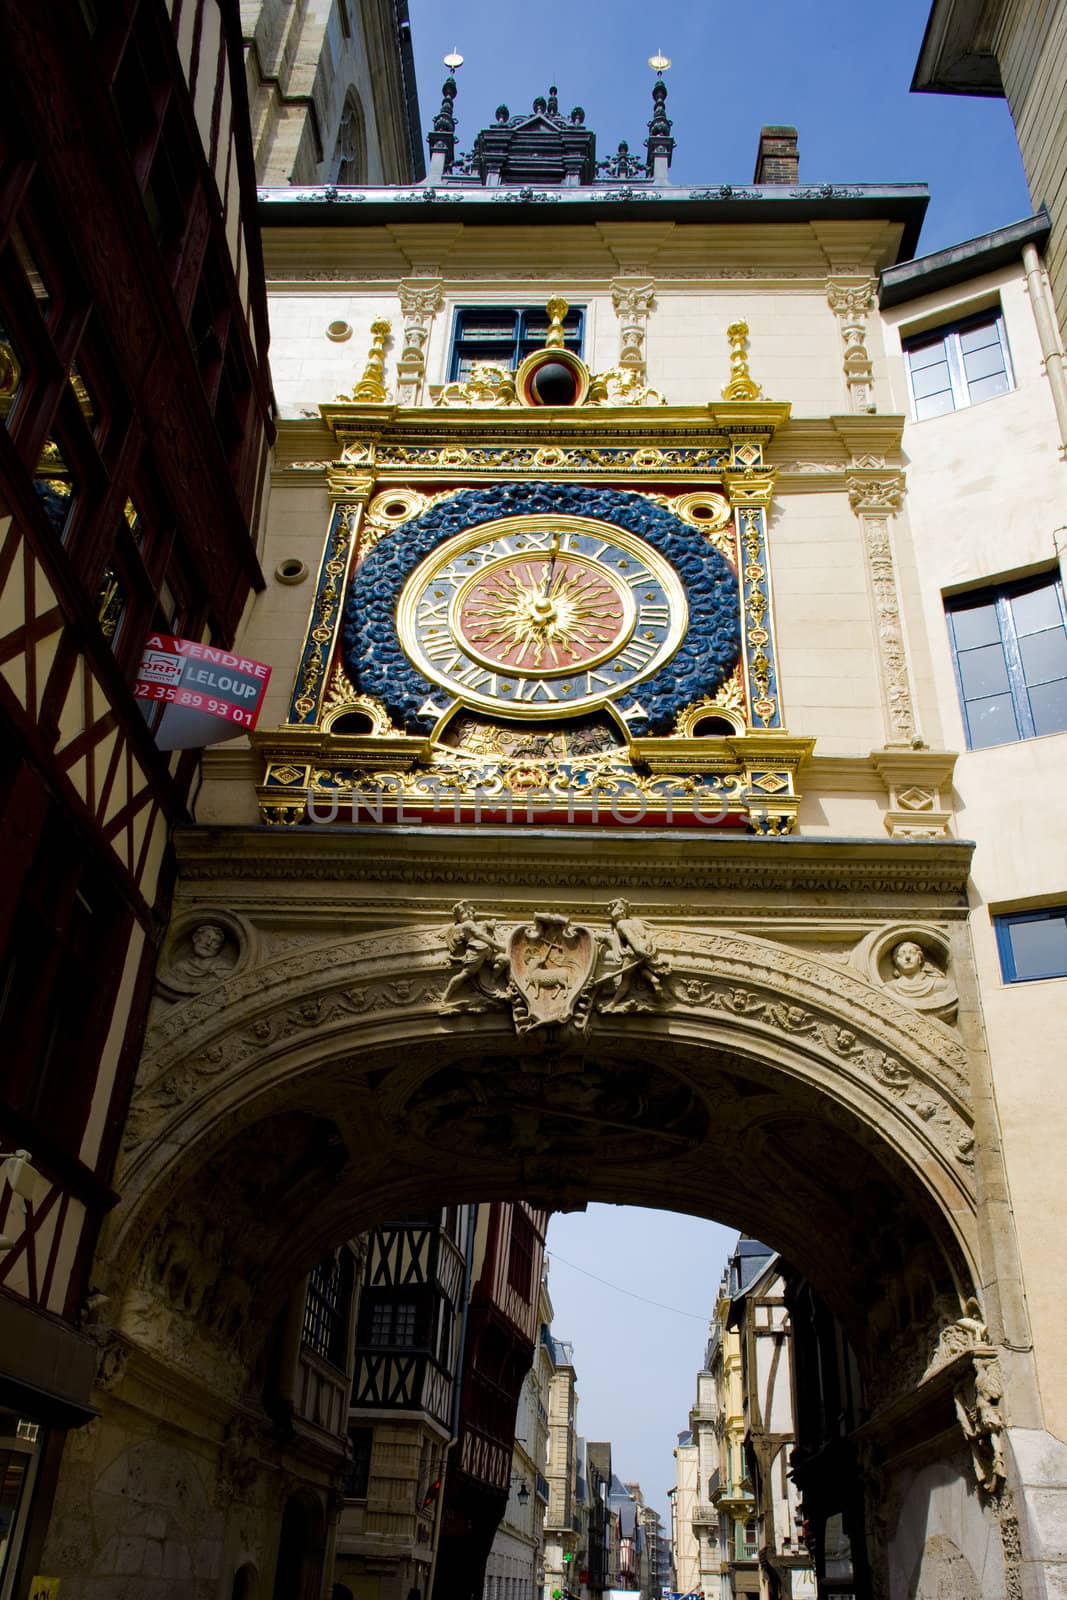 Gros Horloge, Rouen, Normandy, France by phbcz